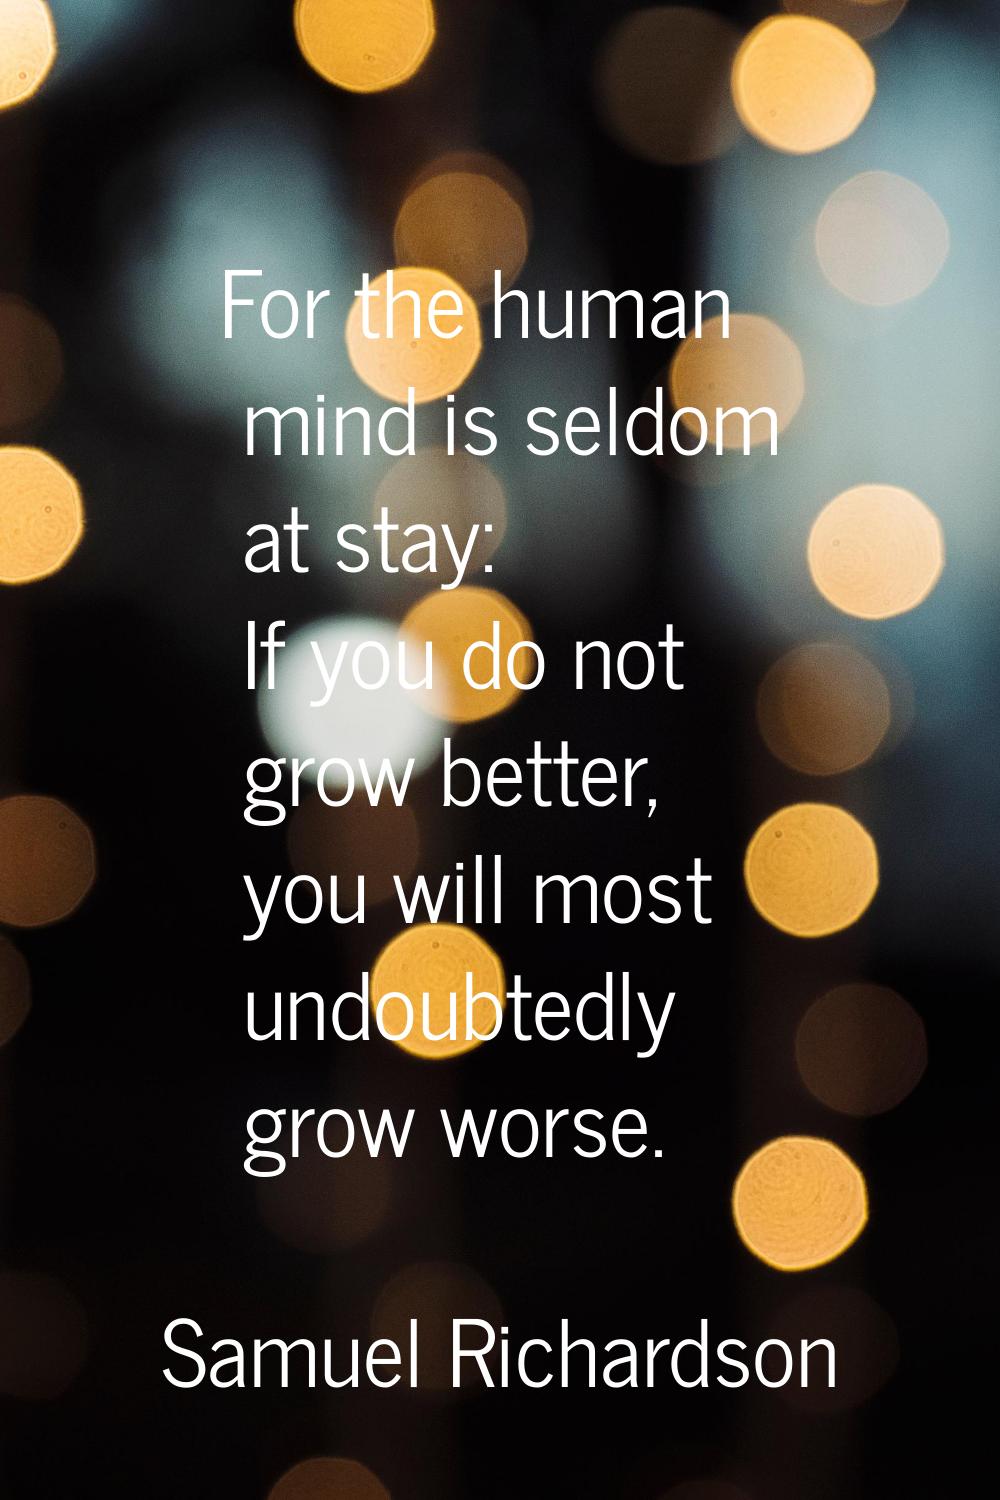 For the human mind is seldom at stay: If you do not grow better, you will most undoubtedly grow wor